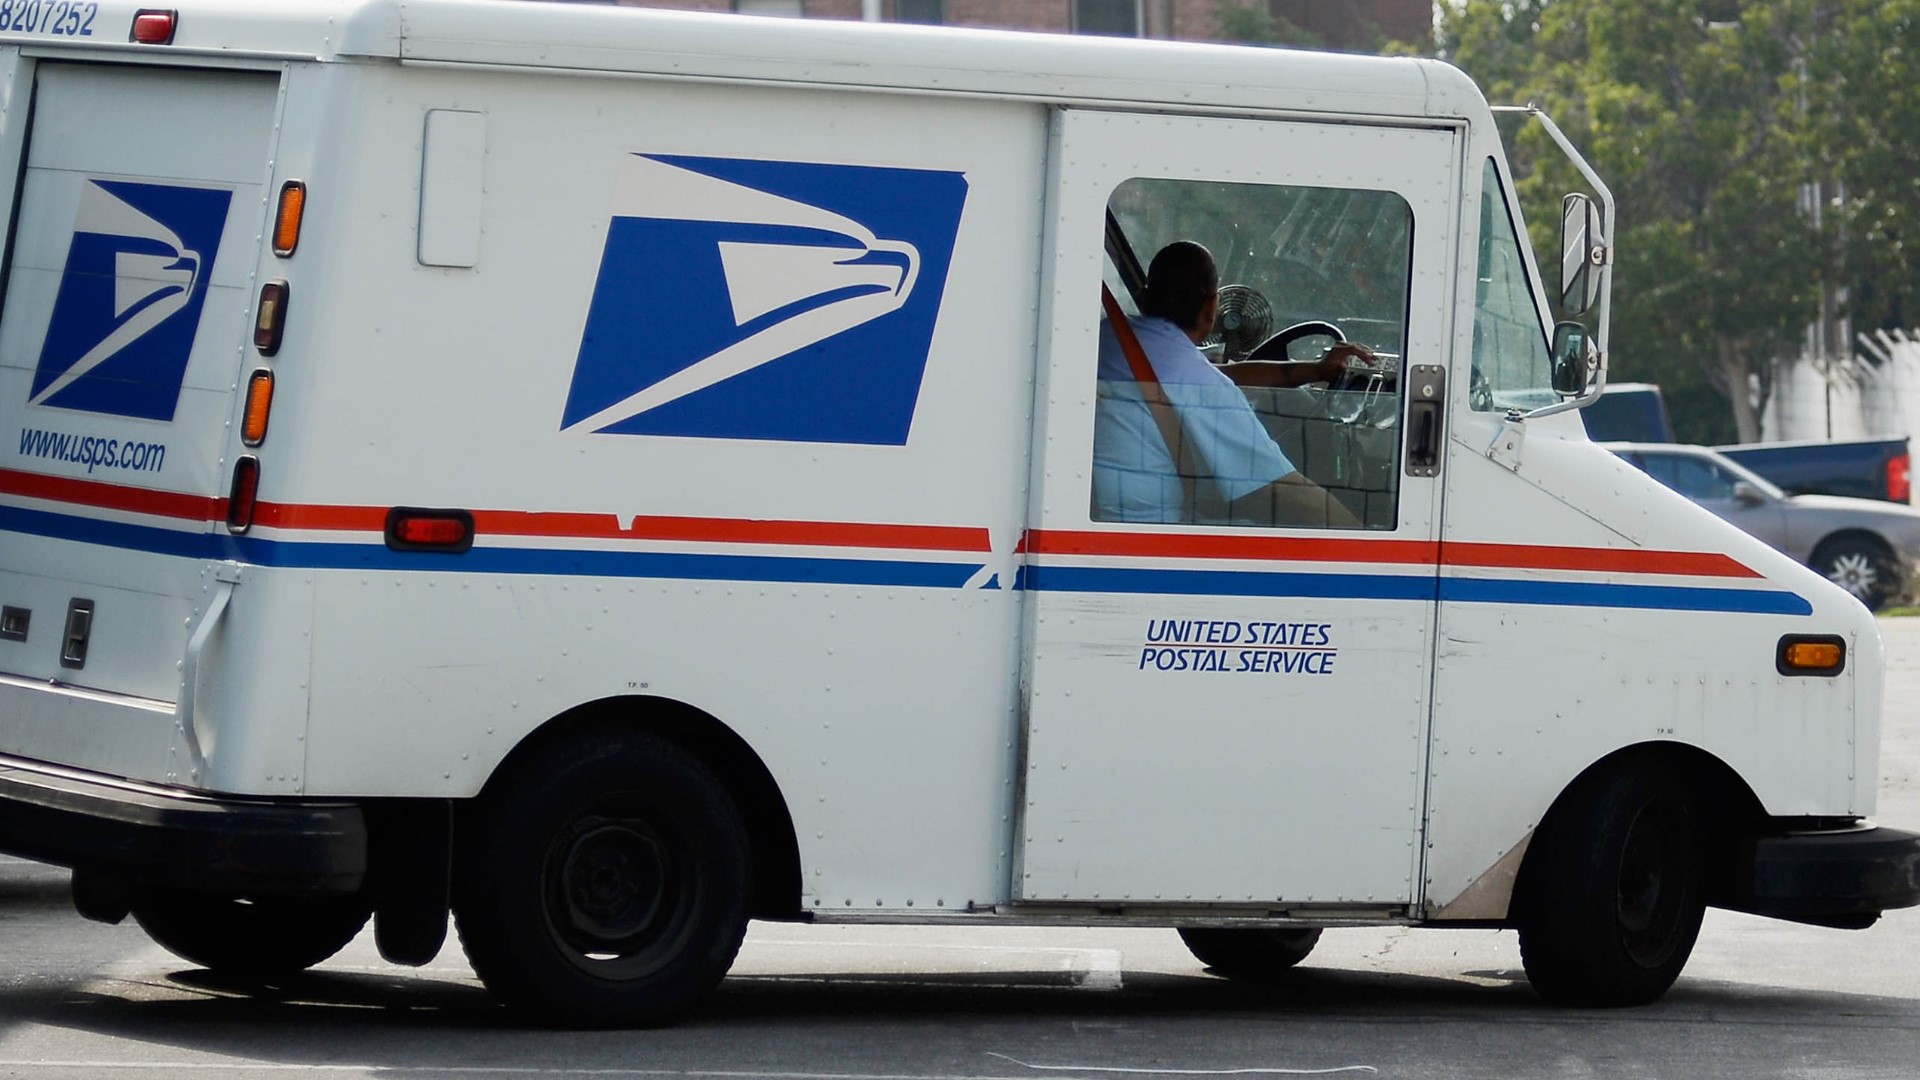 A U.S. judge blocked changes that have slowed mail nationwide, calling them “a politically motivated attack on the efficiency of USPS before the November election."